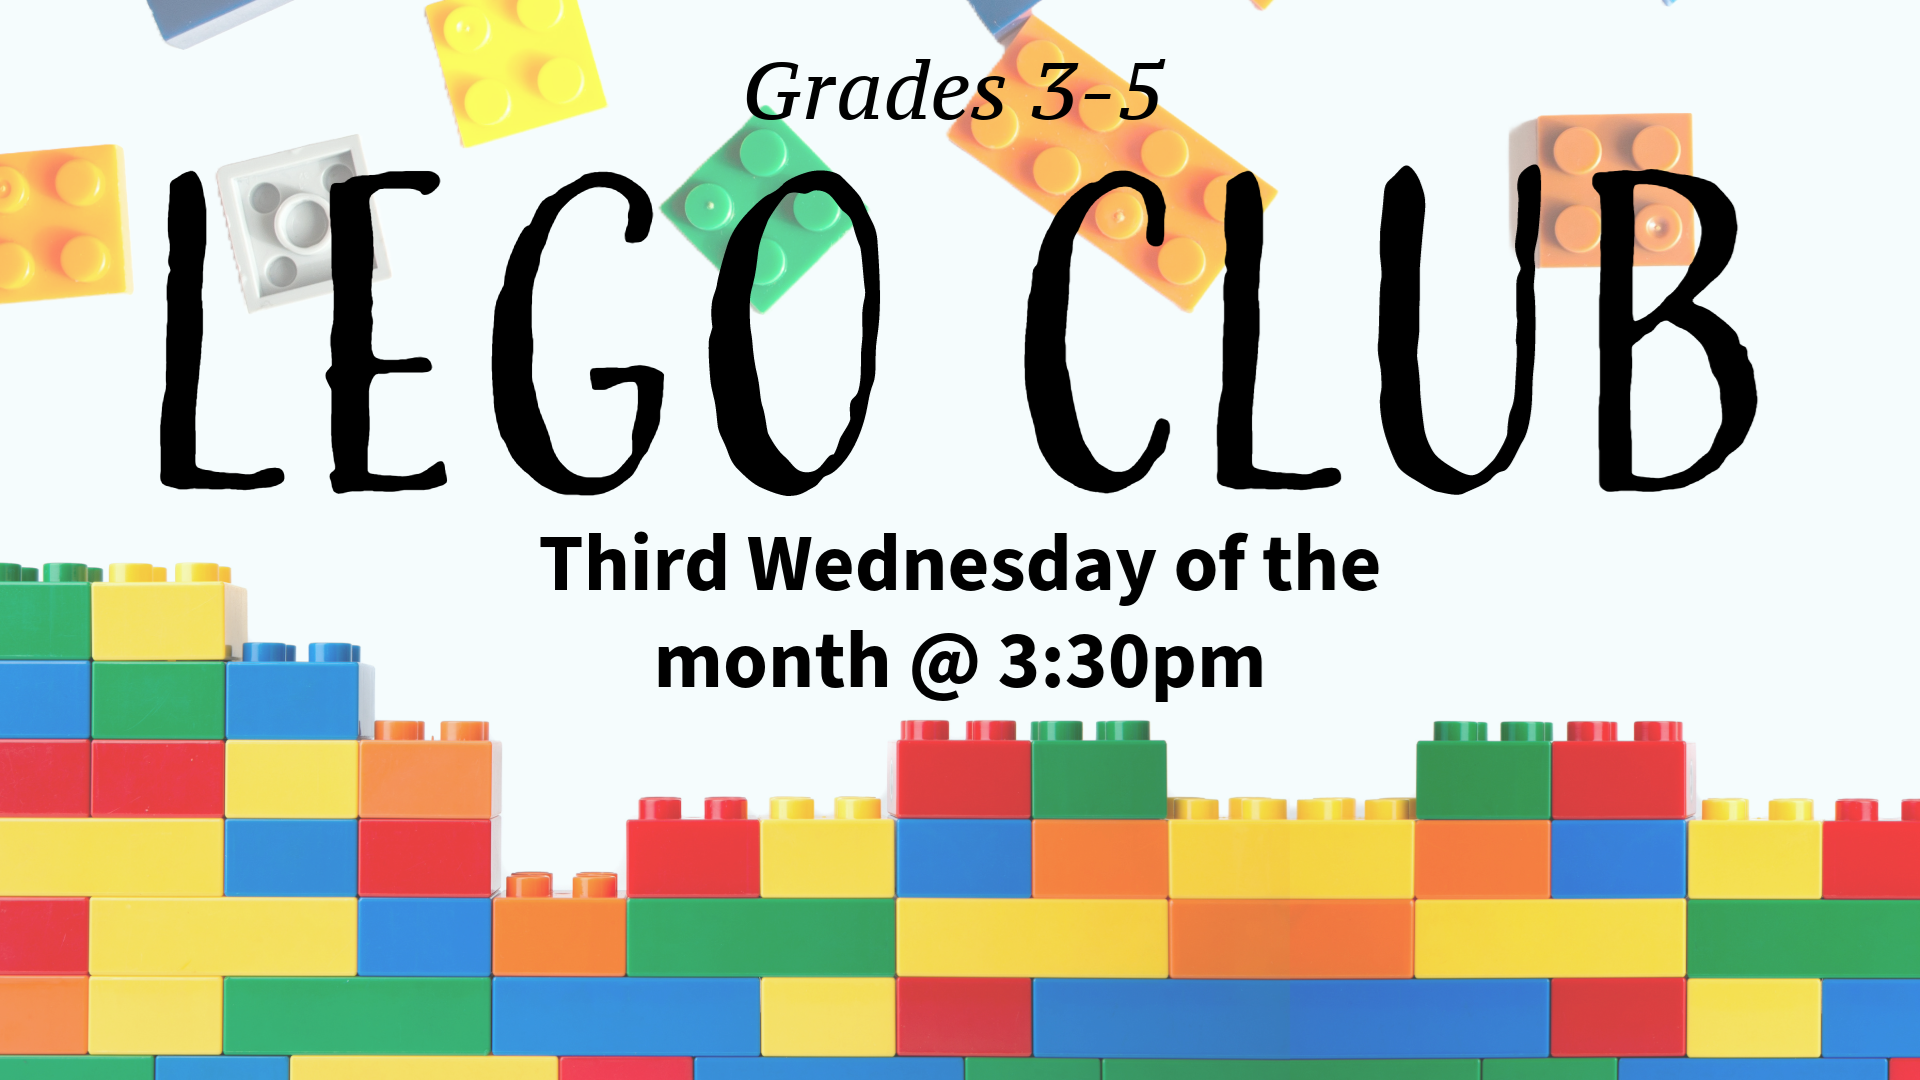 Grades 3-5 LEGO Club Third Wednesday of the month @ 3:30pm